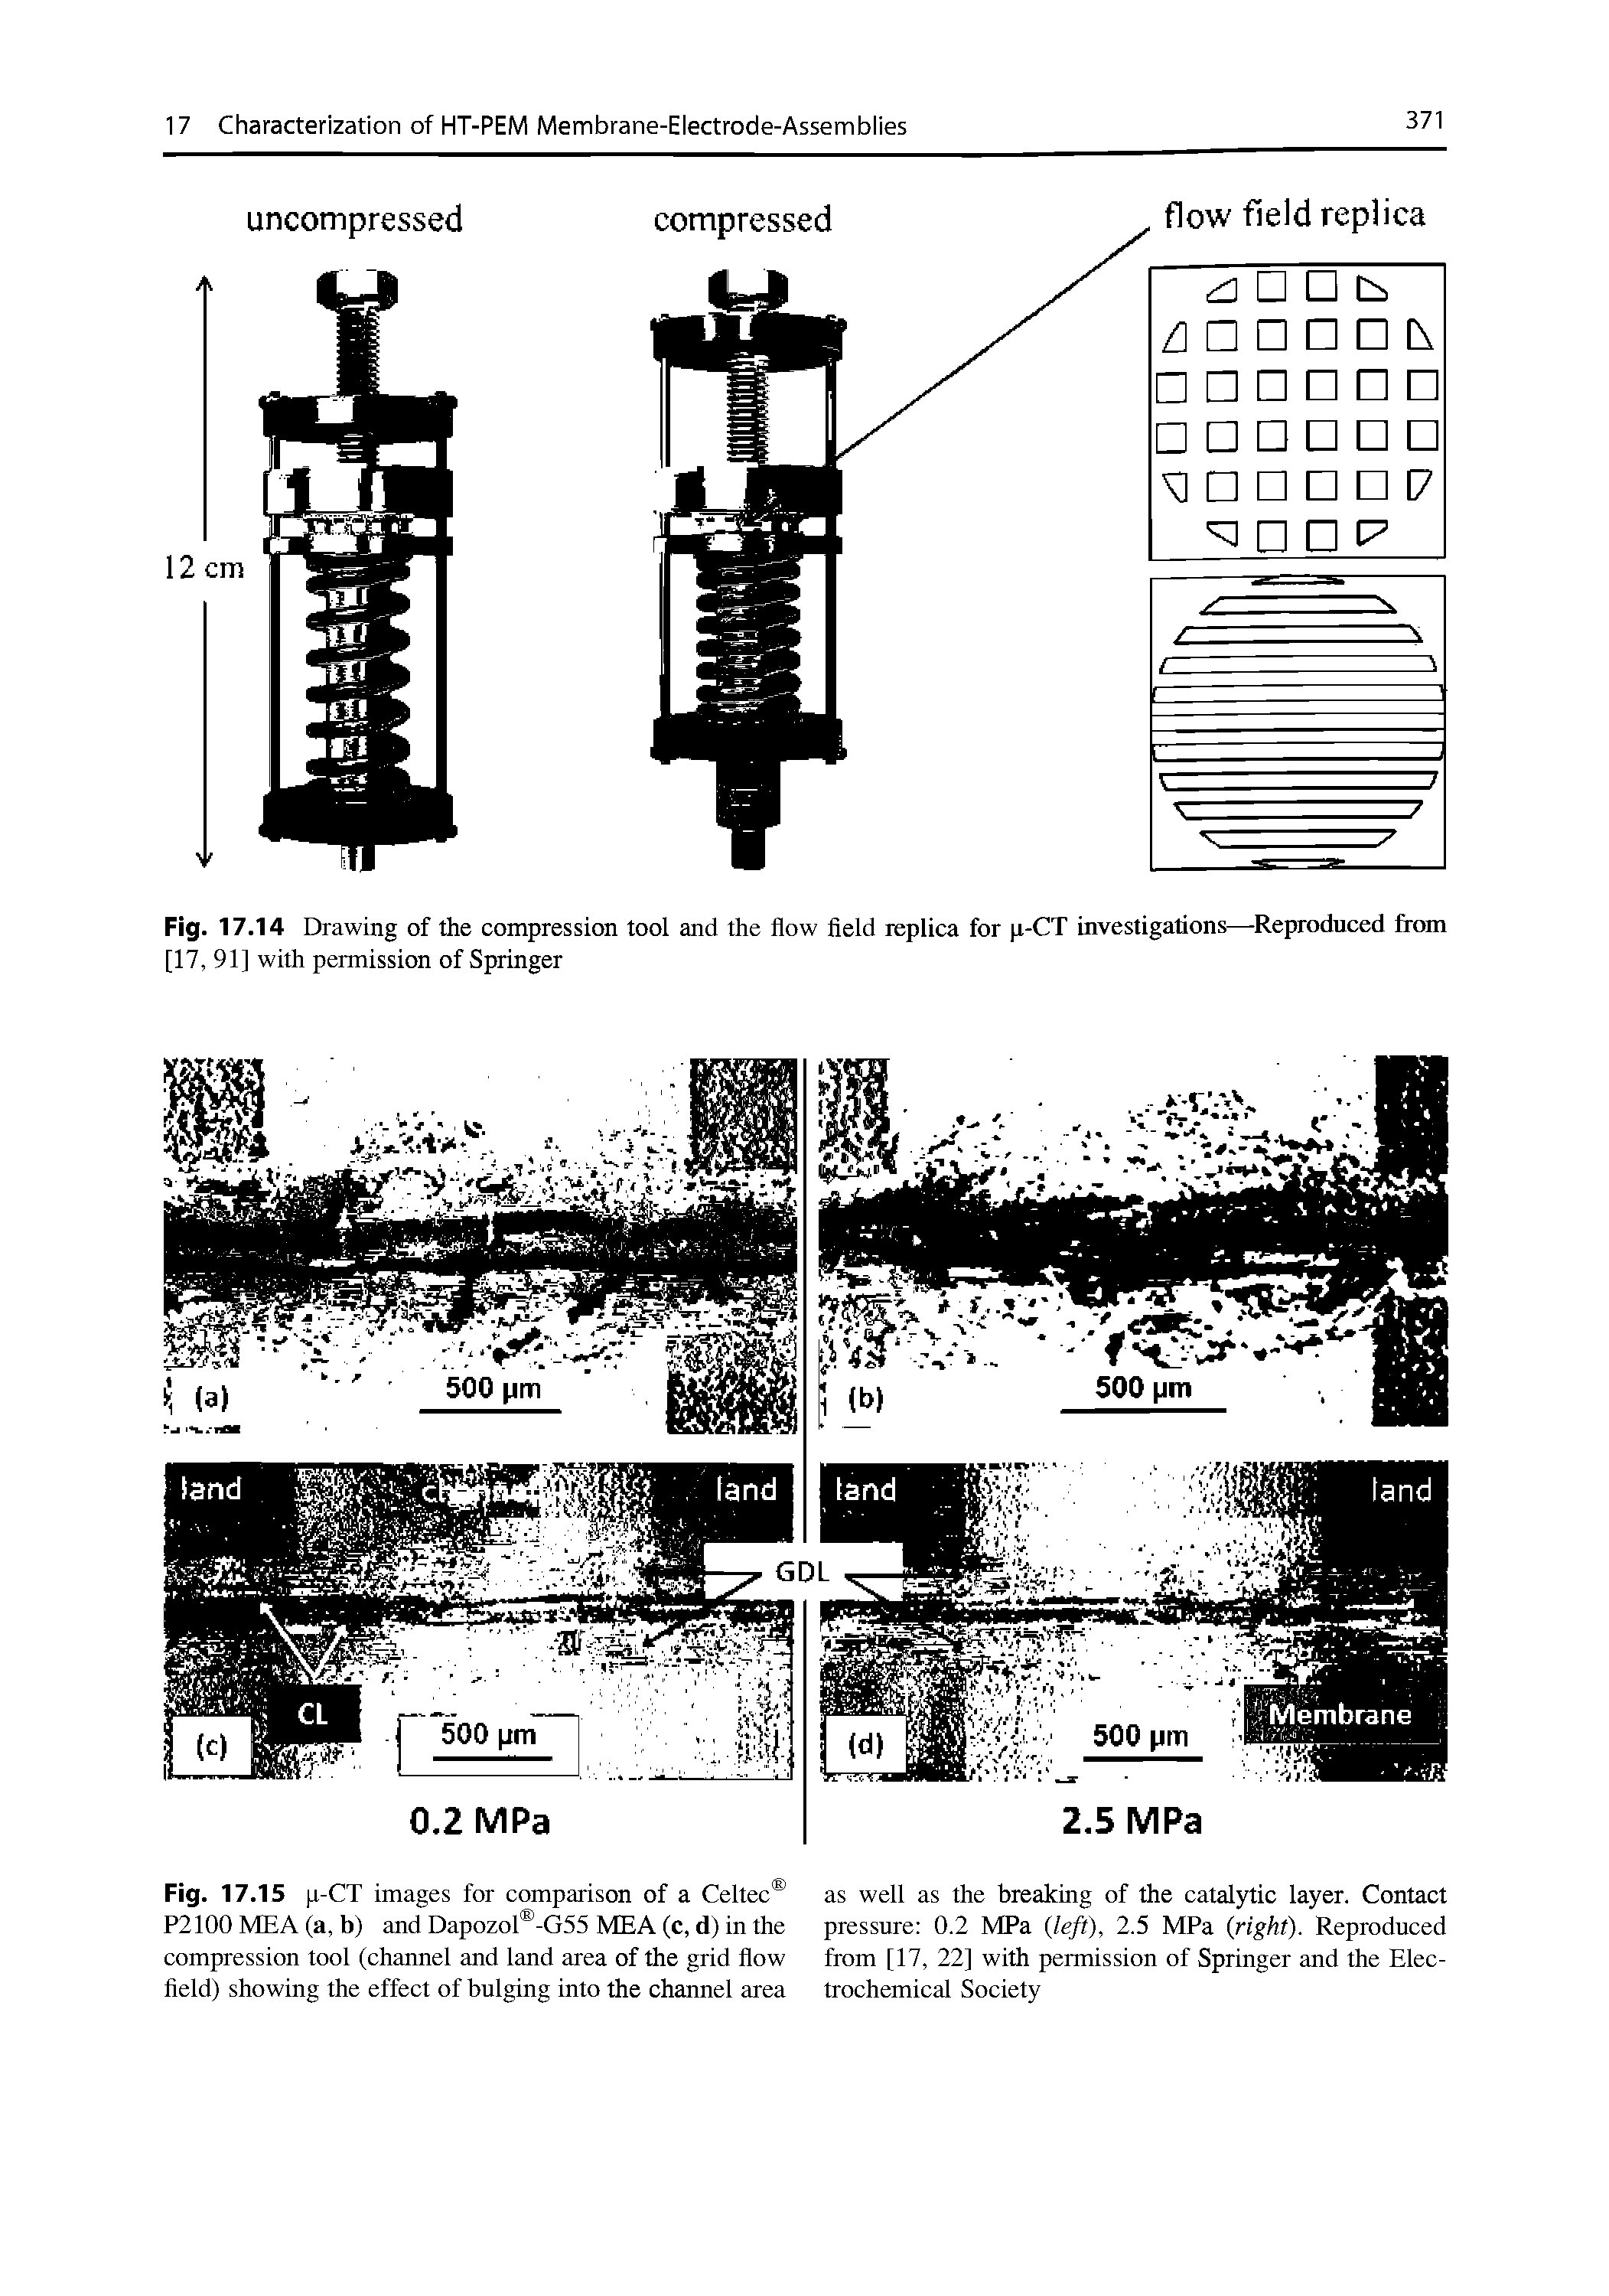 Fig. 17.14 Drawing of the compression tool and the flow fleld replica for p-CT investigations—Reproduced from [17, 91] with permission of Springer...